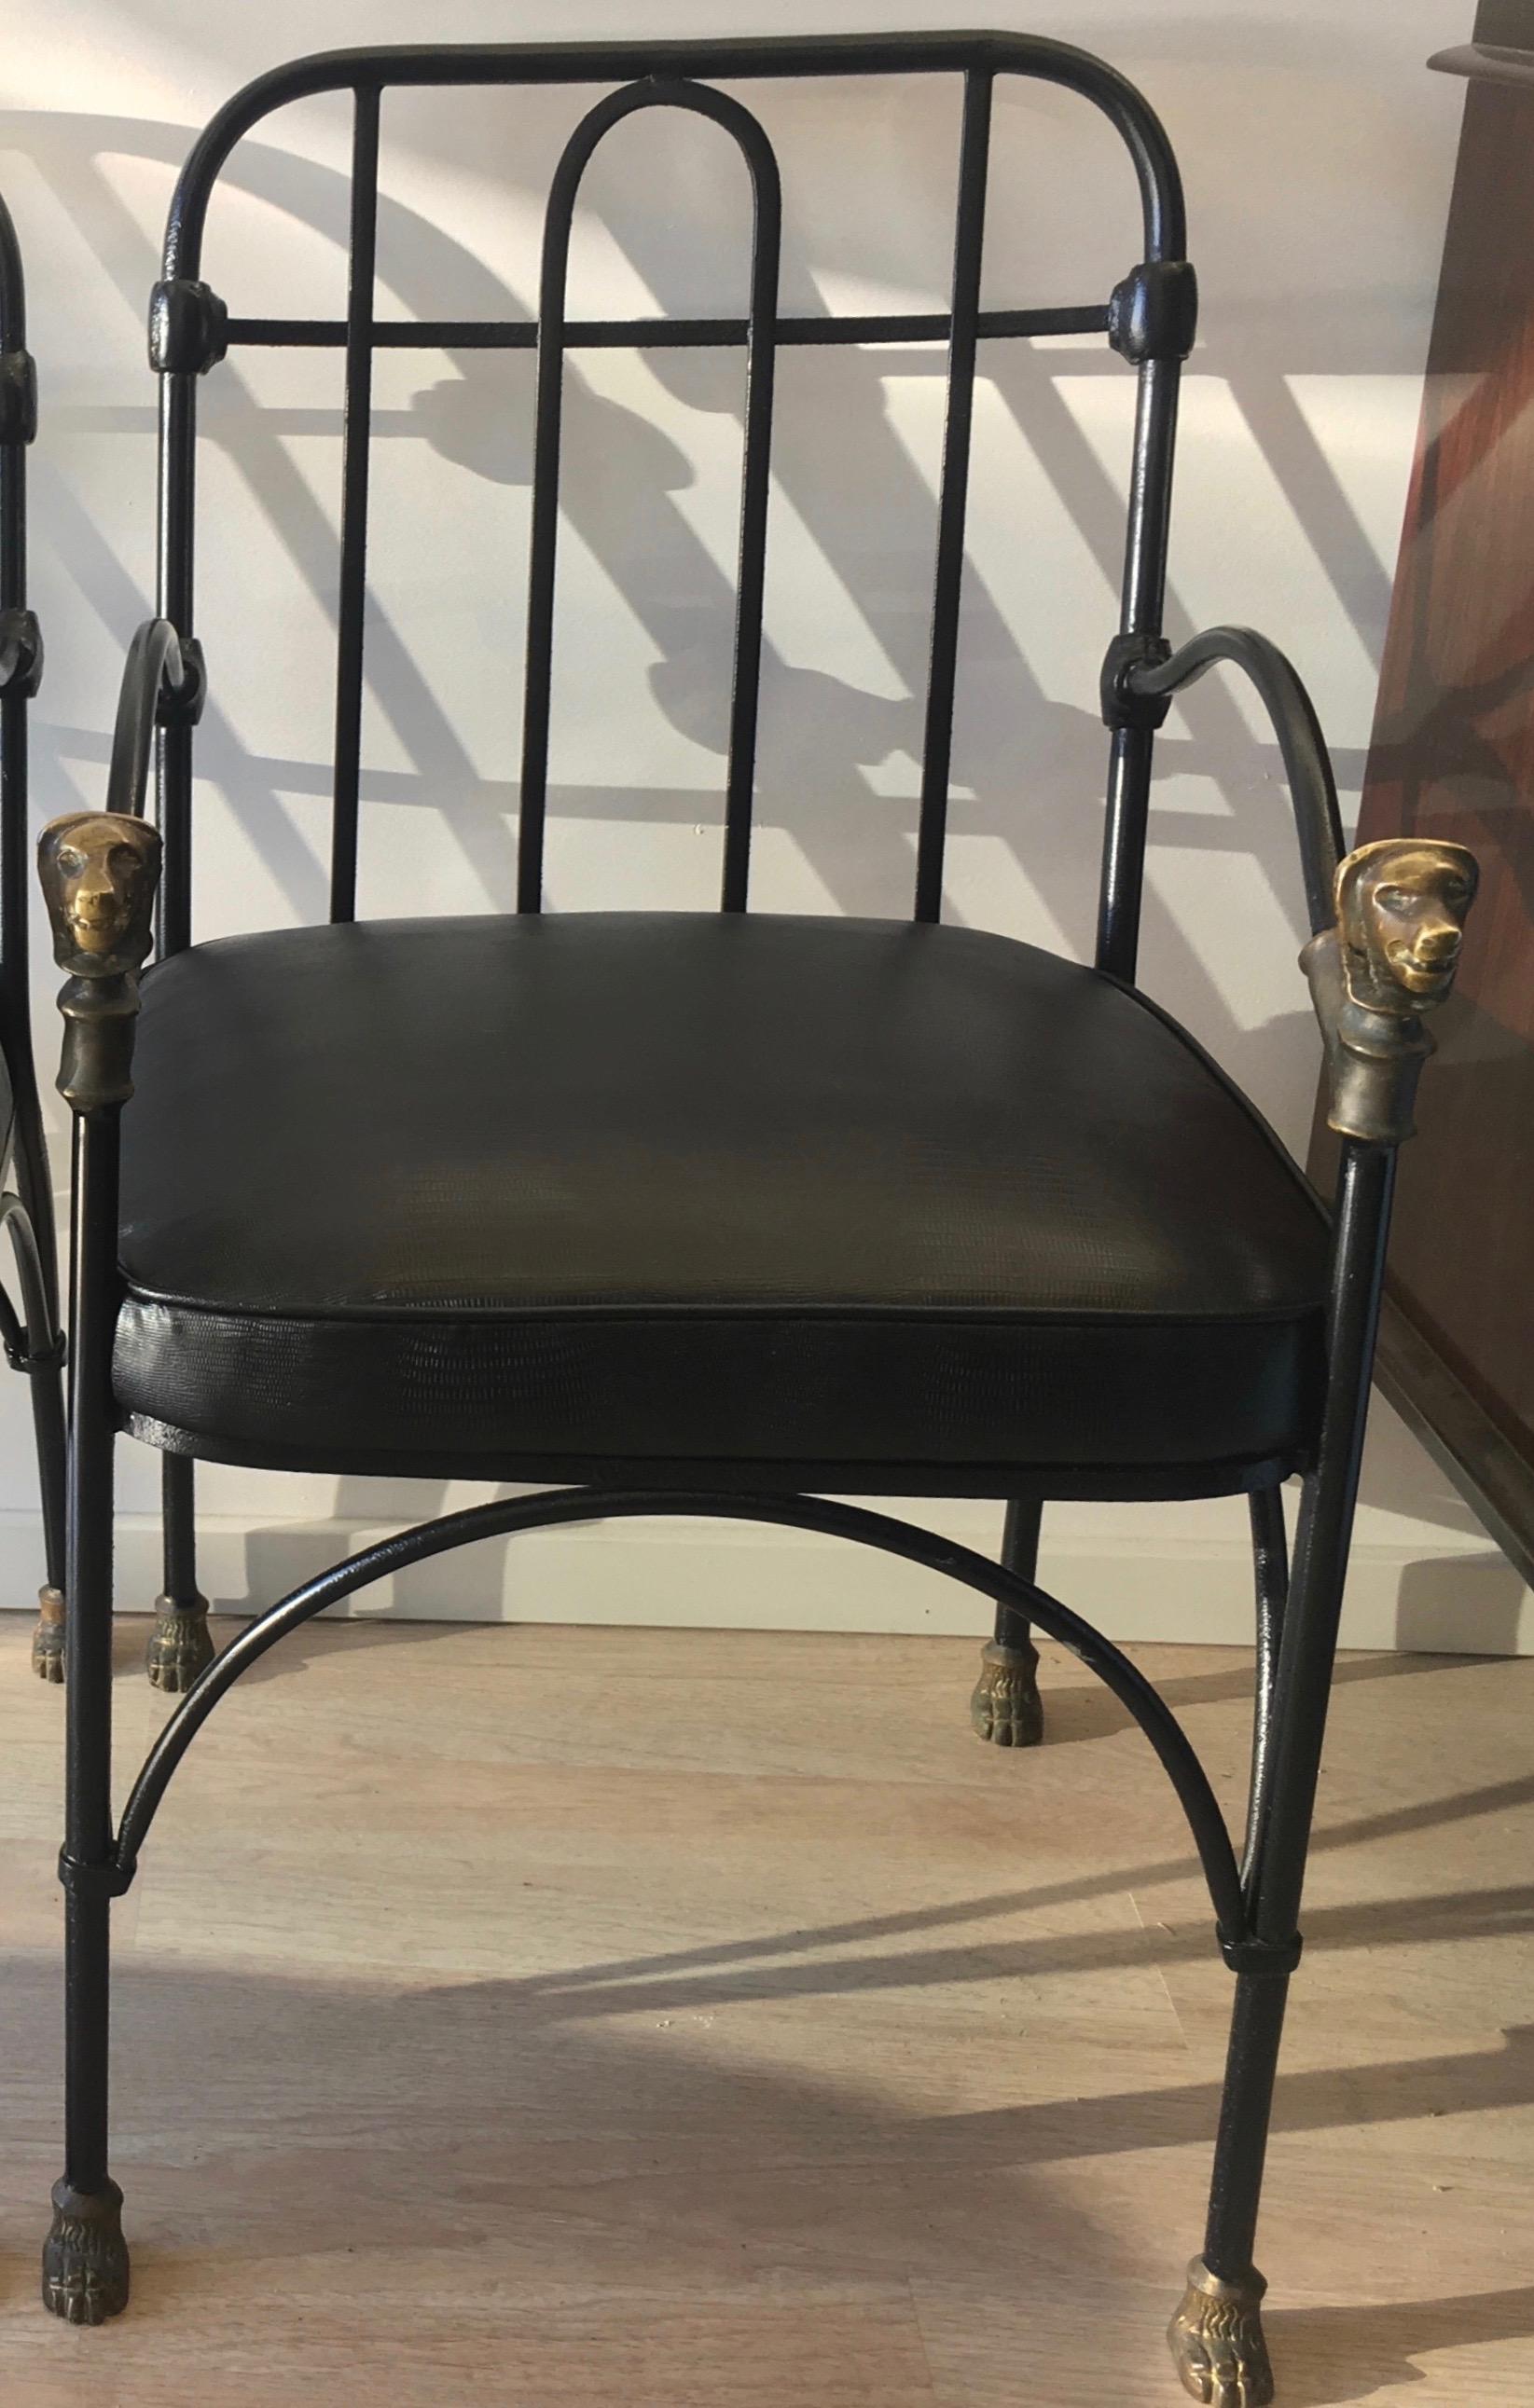 Art Deco Iron Chair with Bronze Lion Finial and Feet after Giacometti